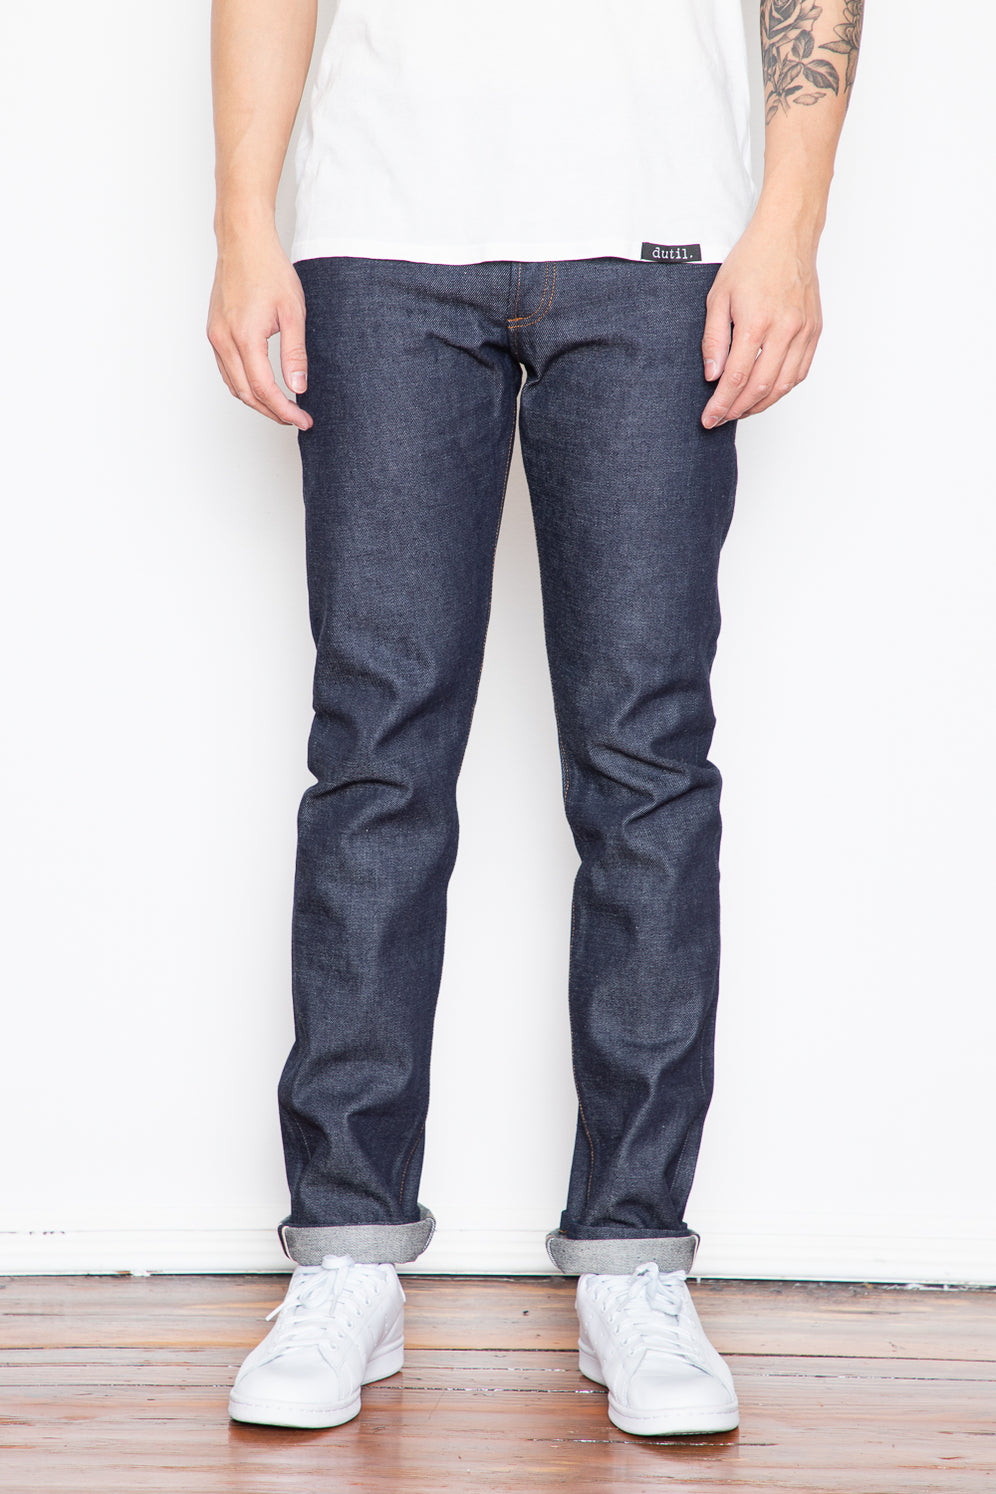 Browse though Men's Jeans from APC- Canada & USA– Dutil Denim